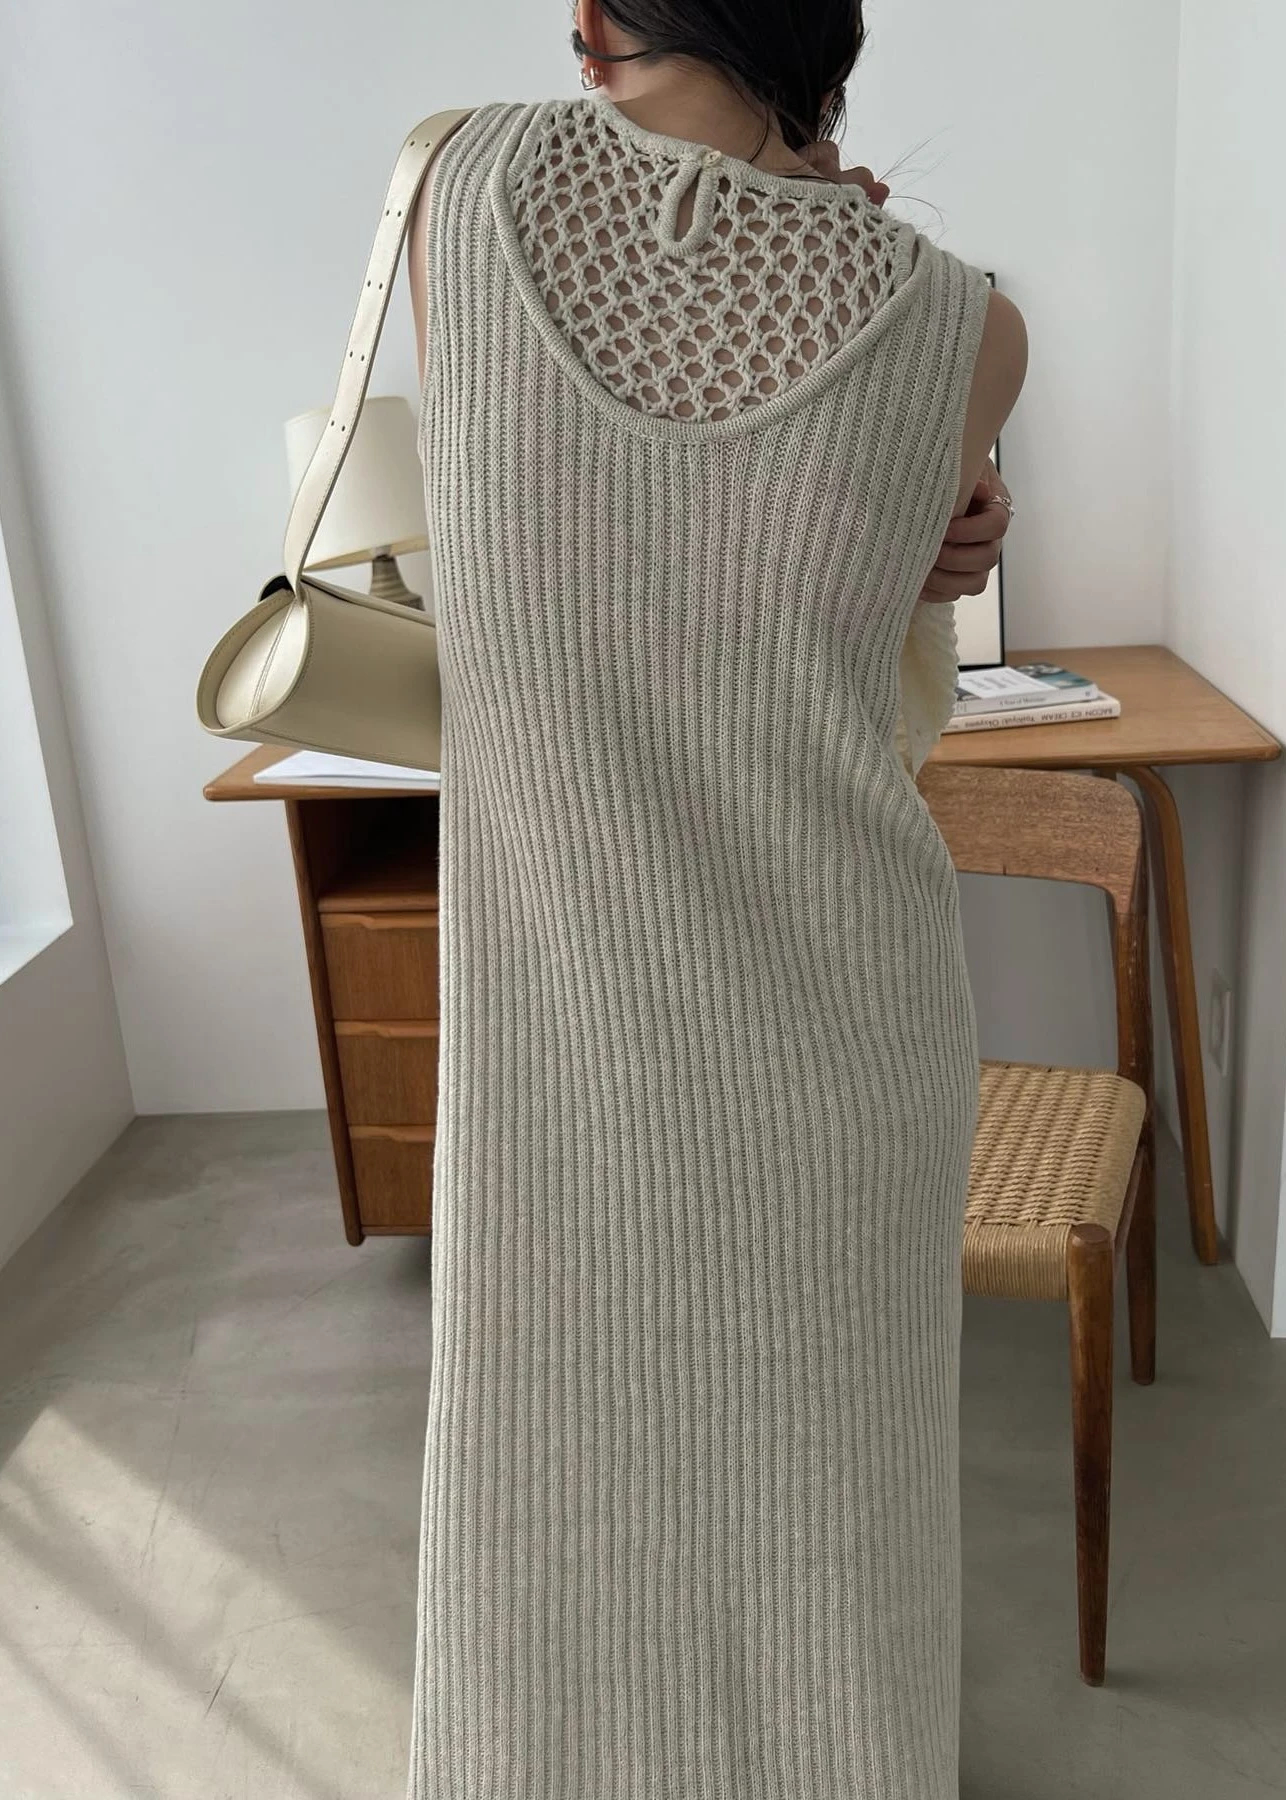 incision mesh 2way knit tank OP / willfully（ウィルフリー）の 